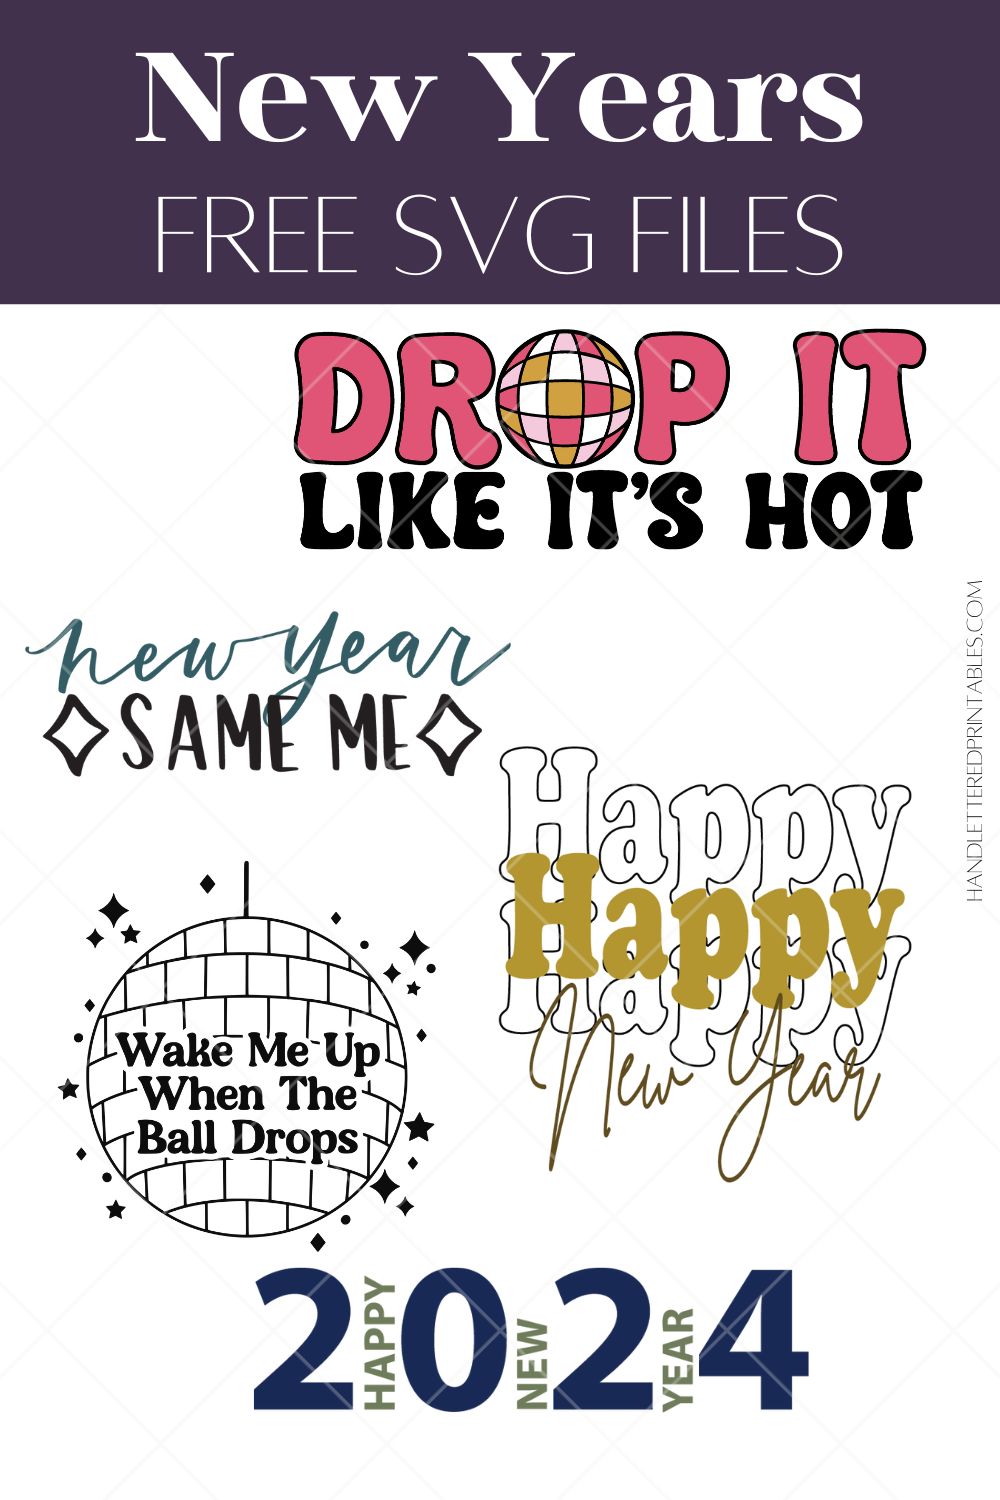 New Years Eve Shirts SVG designs on white background in collage